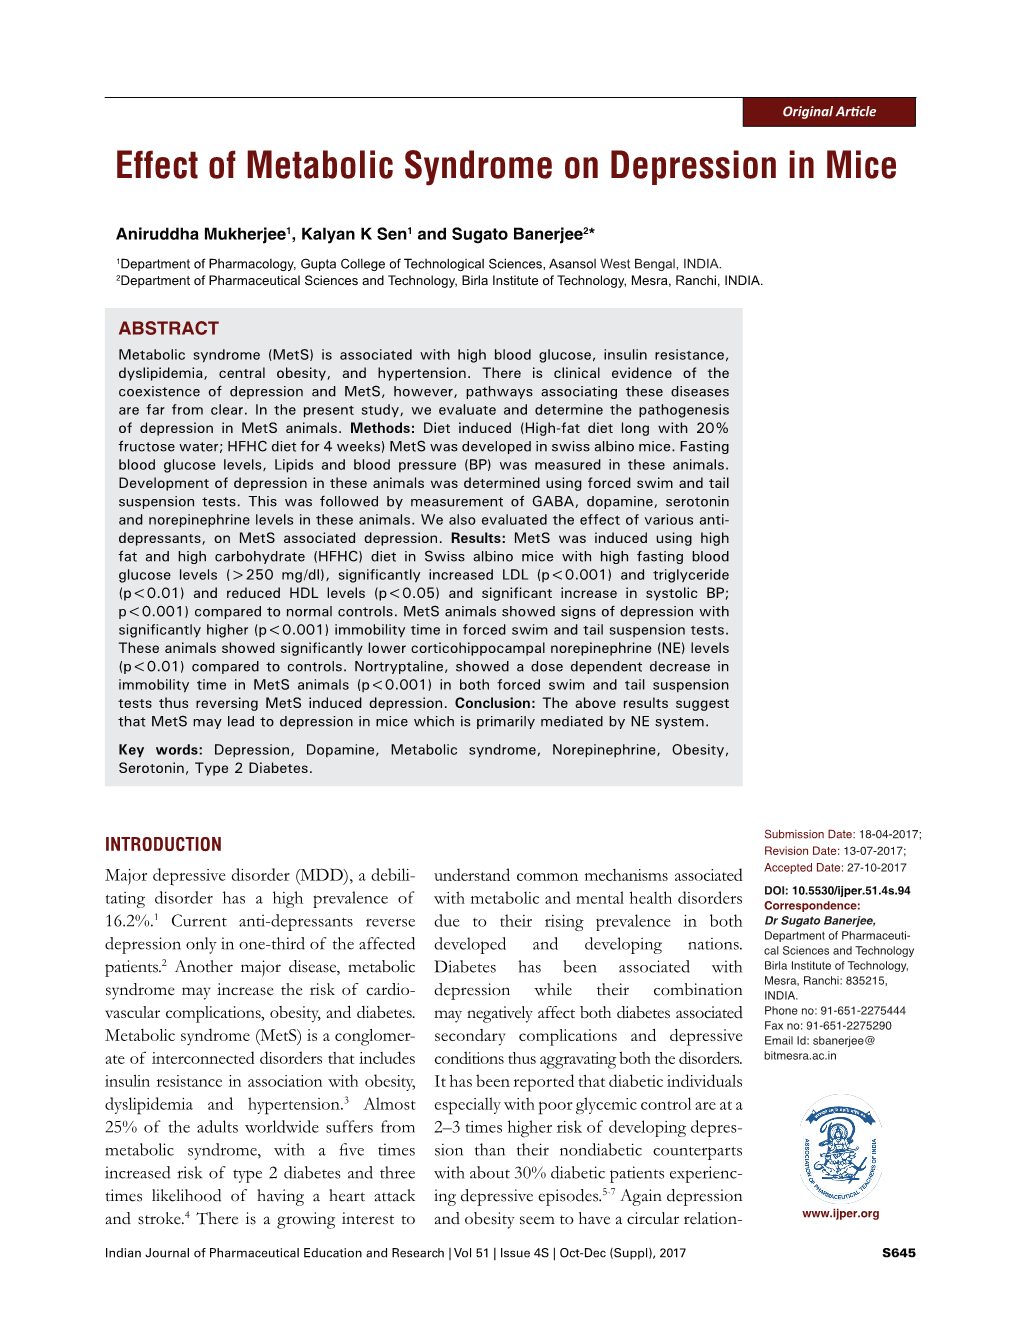 Effect of Metabolic Syndrome on Depression in Mice